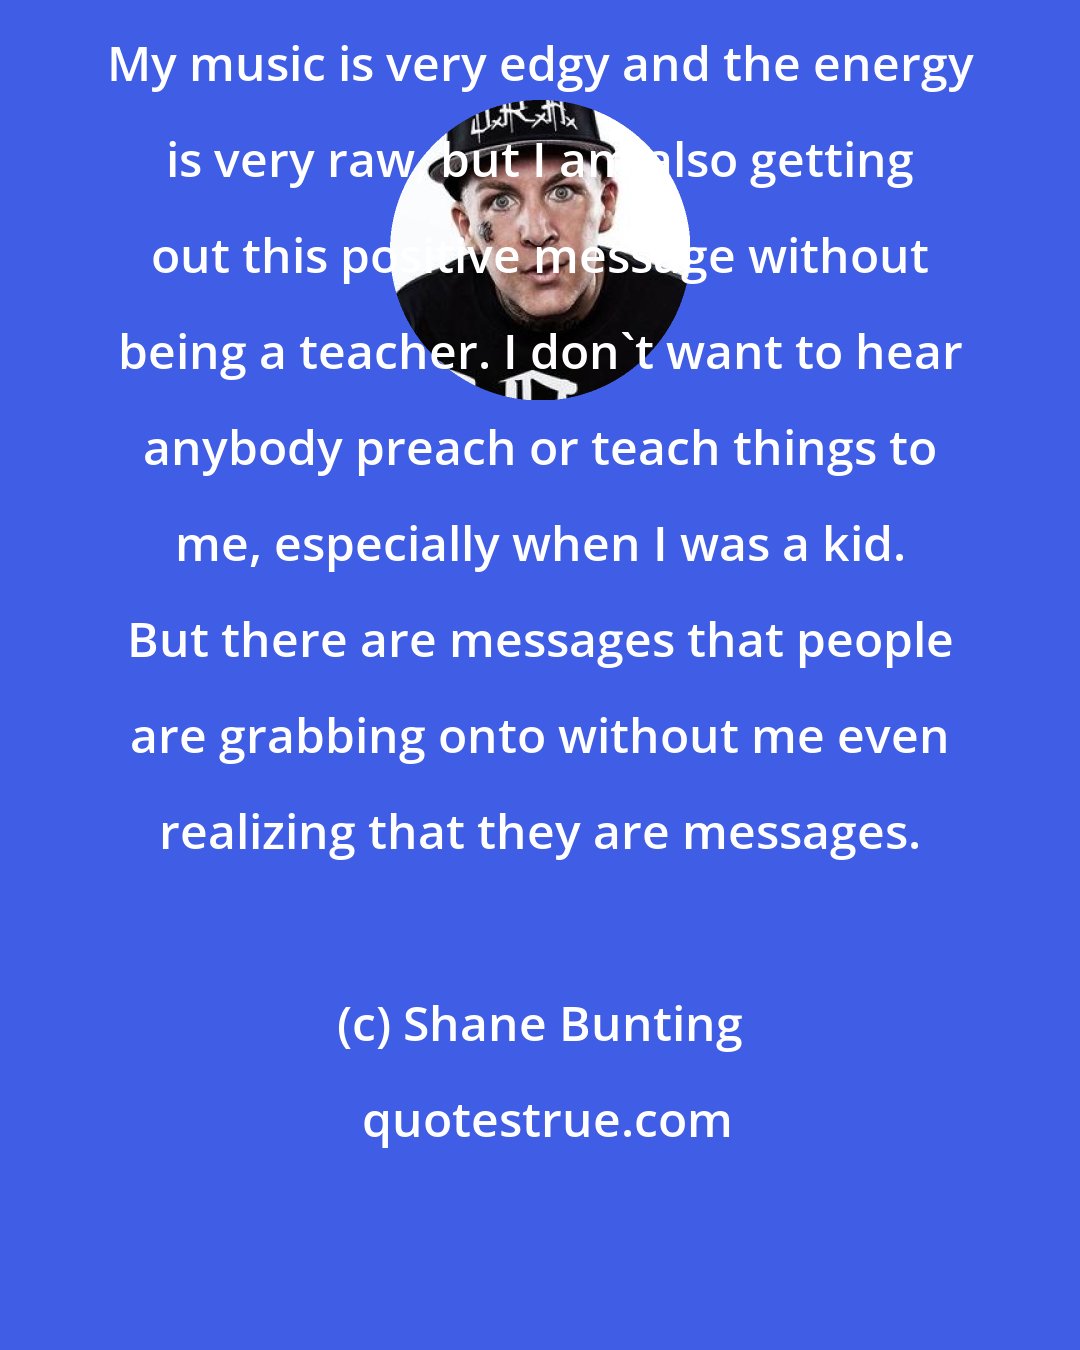 Shane Bunting: My music is very edgy and the energy is very raw, but I am also getting out this positive message without being a teacher. I don't want to hear anybody preach or teach things to me, especially when I was a kid. But there are messages that people are grabbing onto without me even realizing that they are messages.